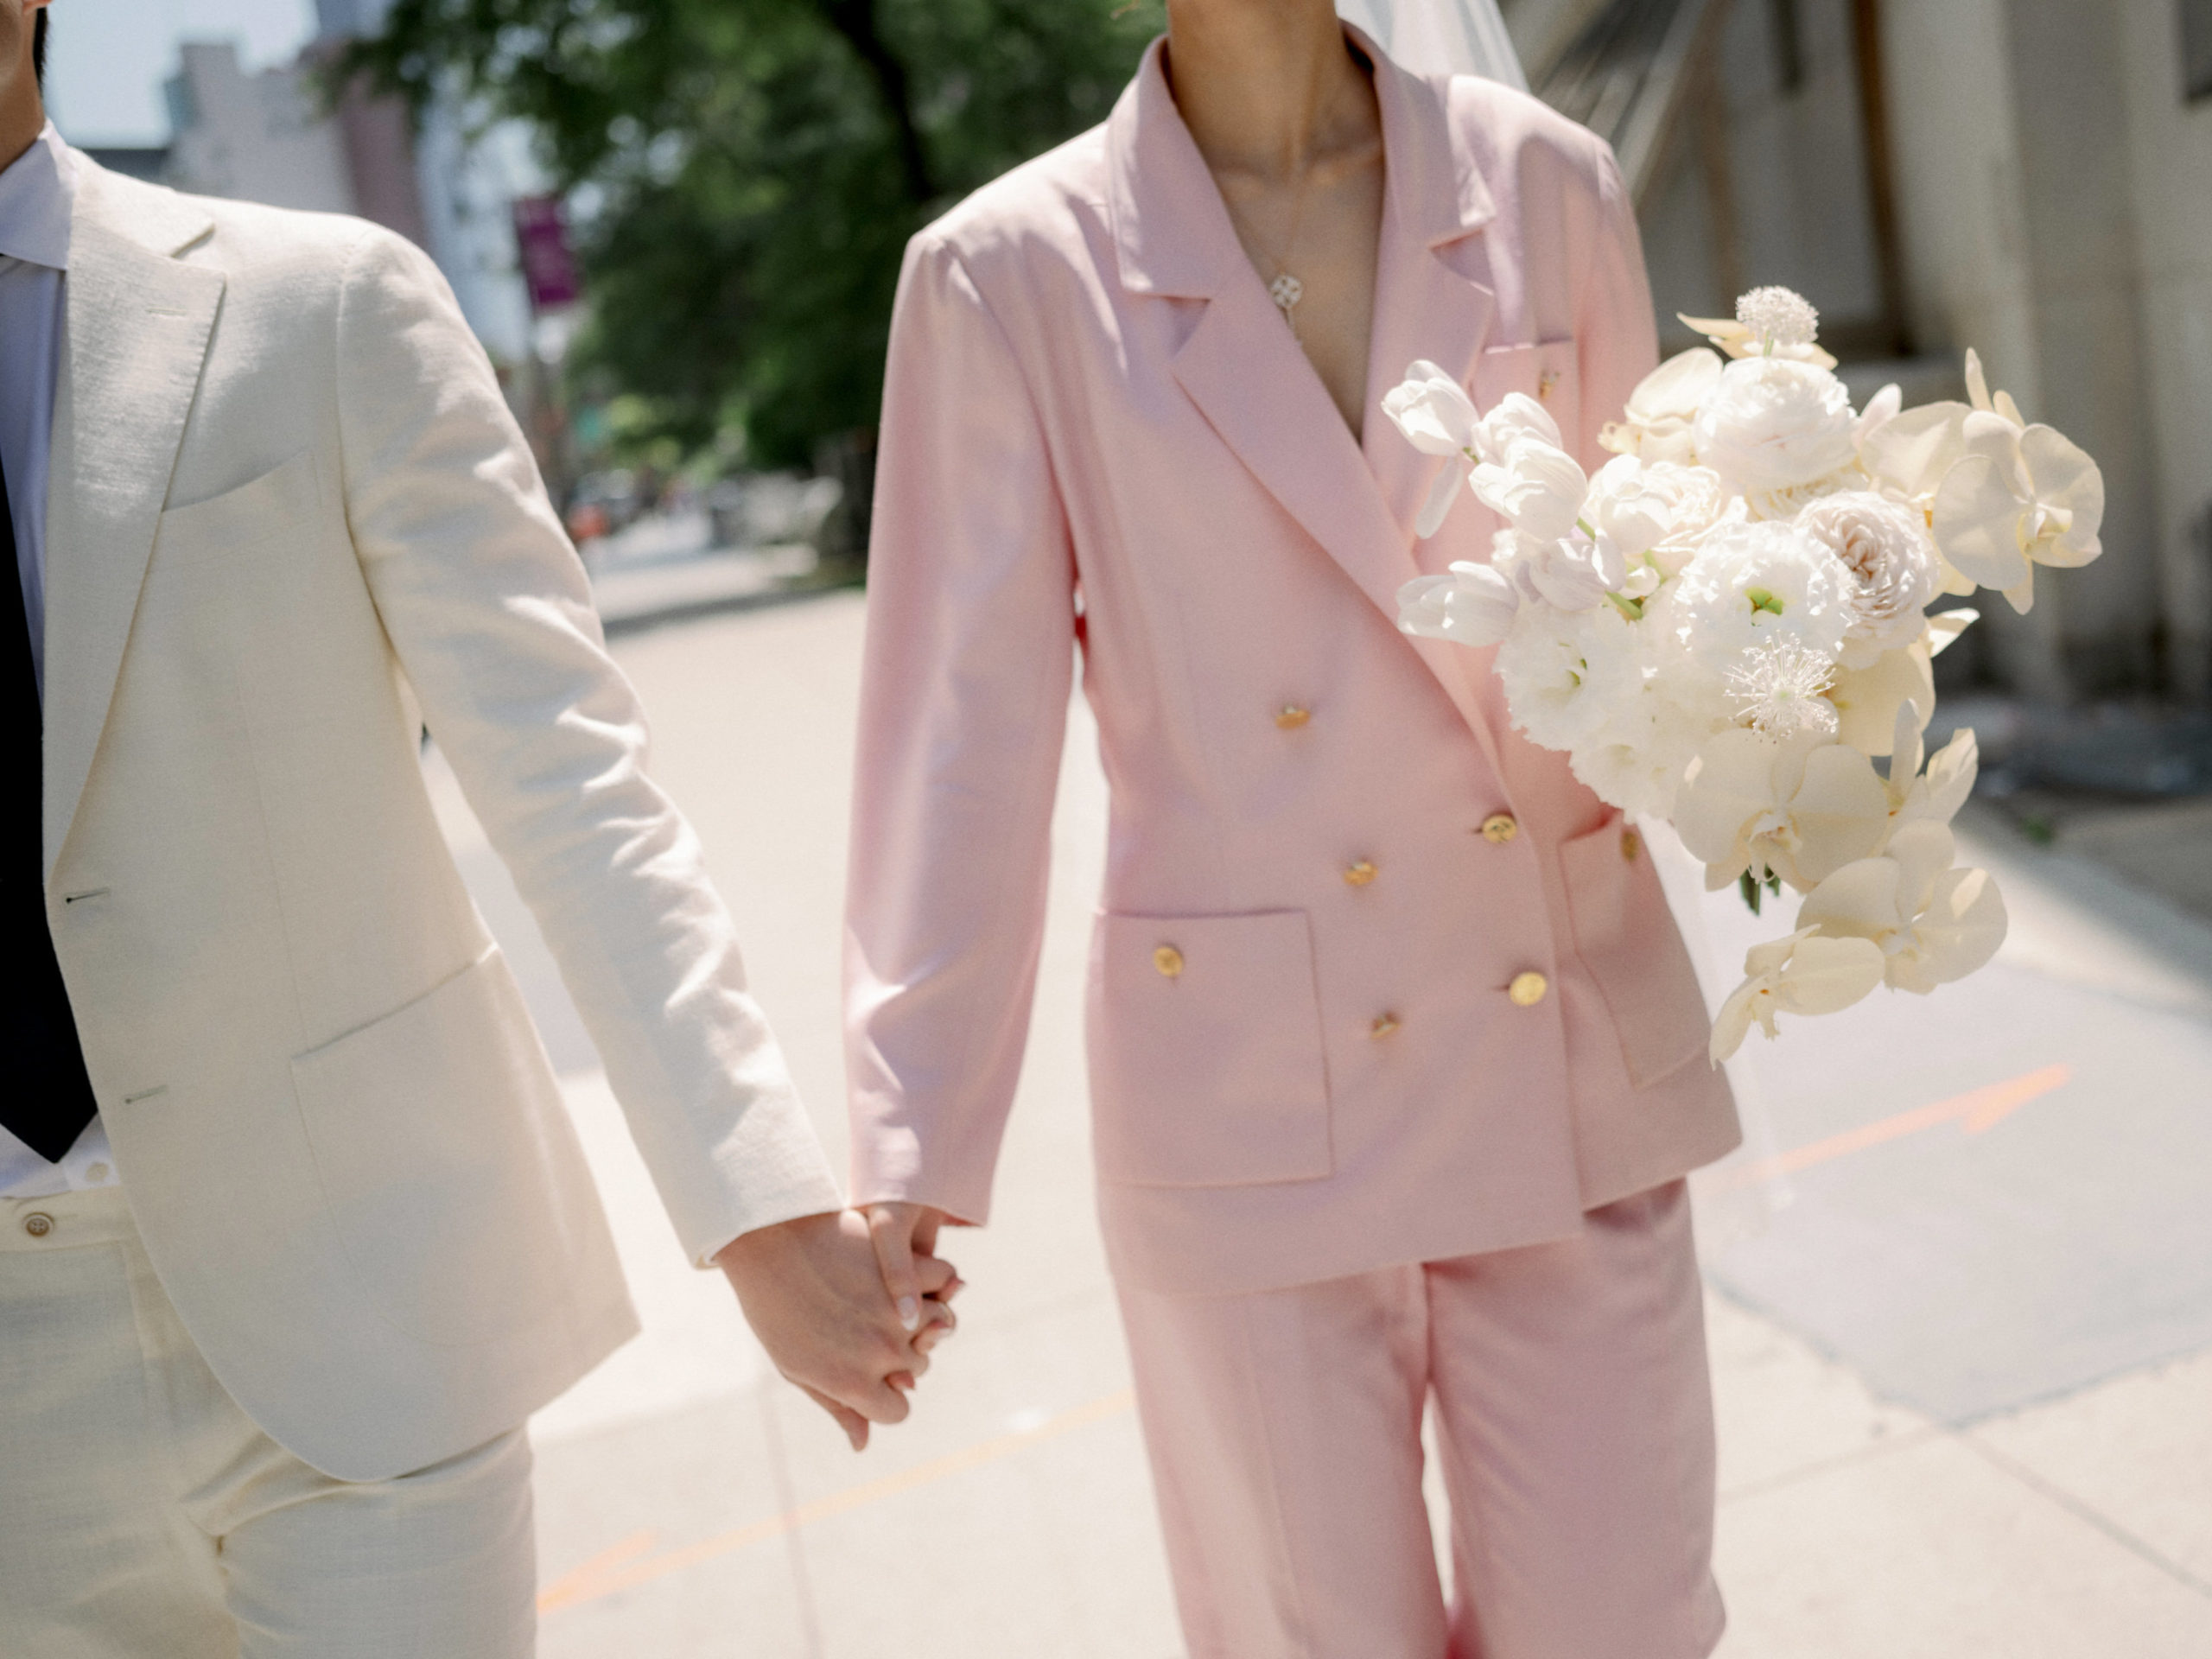 The bride is wearing a pink wedding suit for her city hall wedding. Editorial elopement Image by Jenny Fu Studio